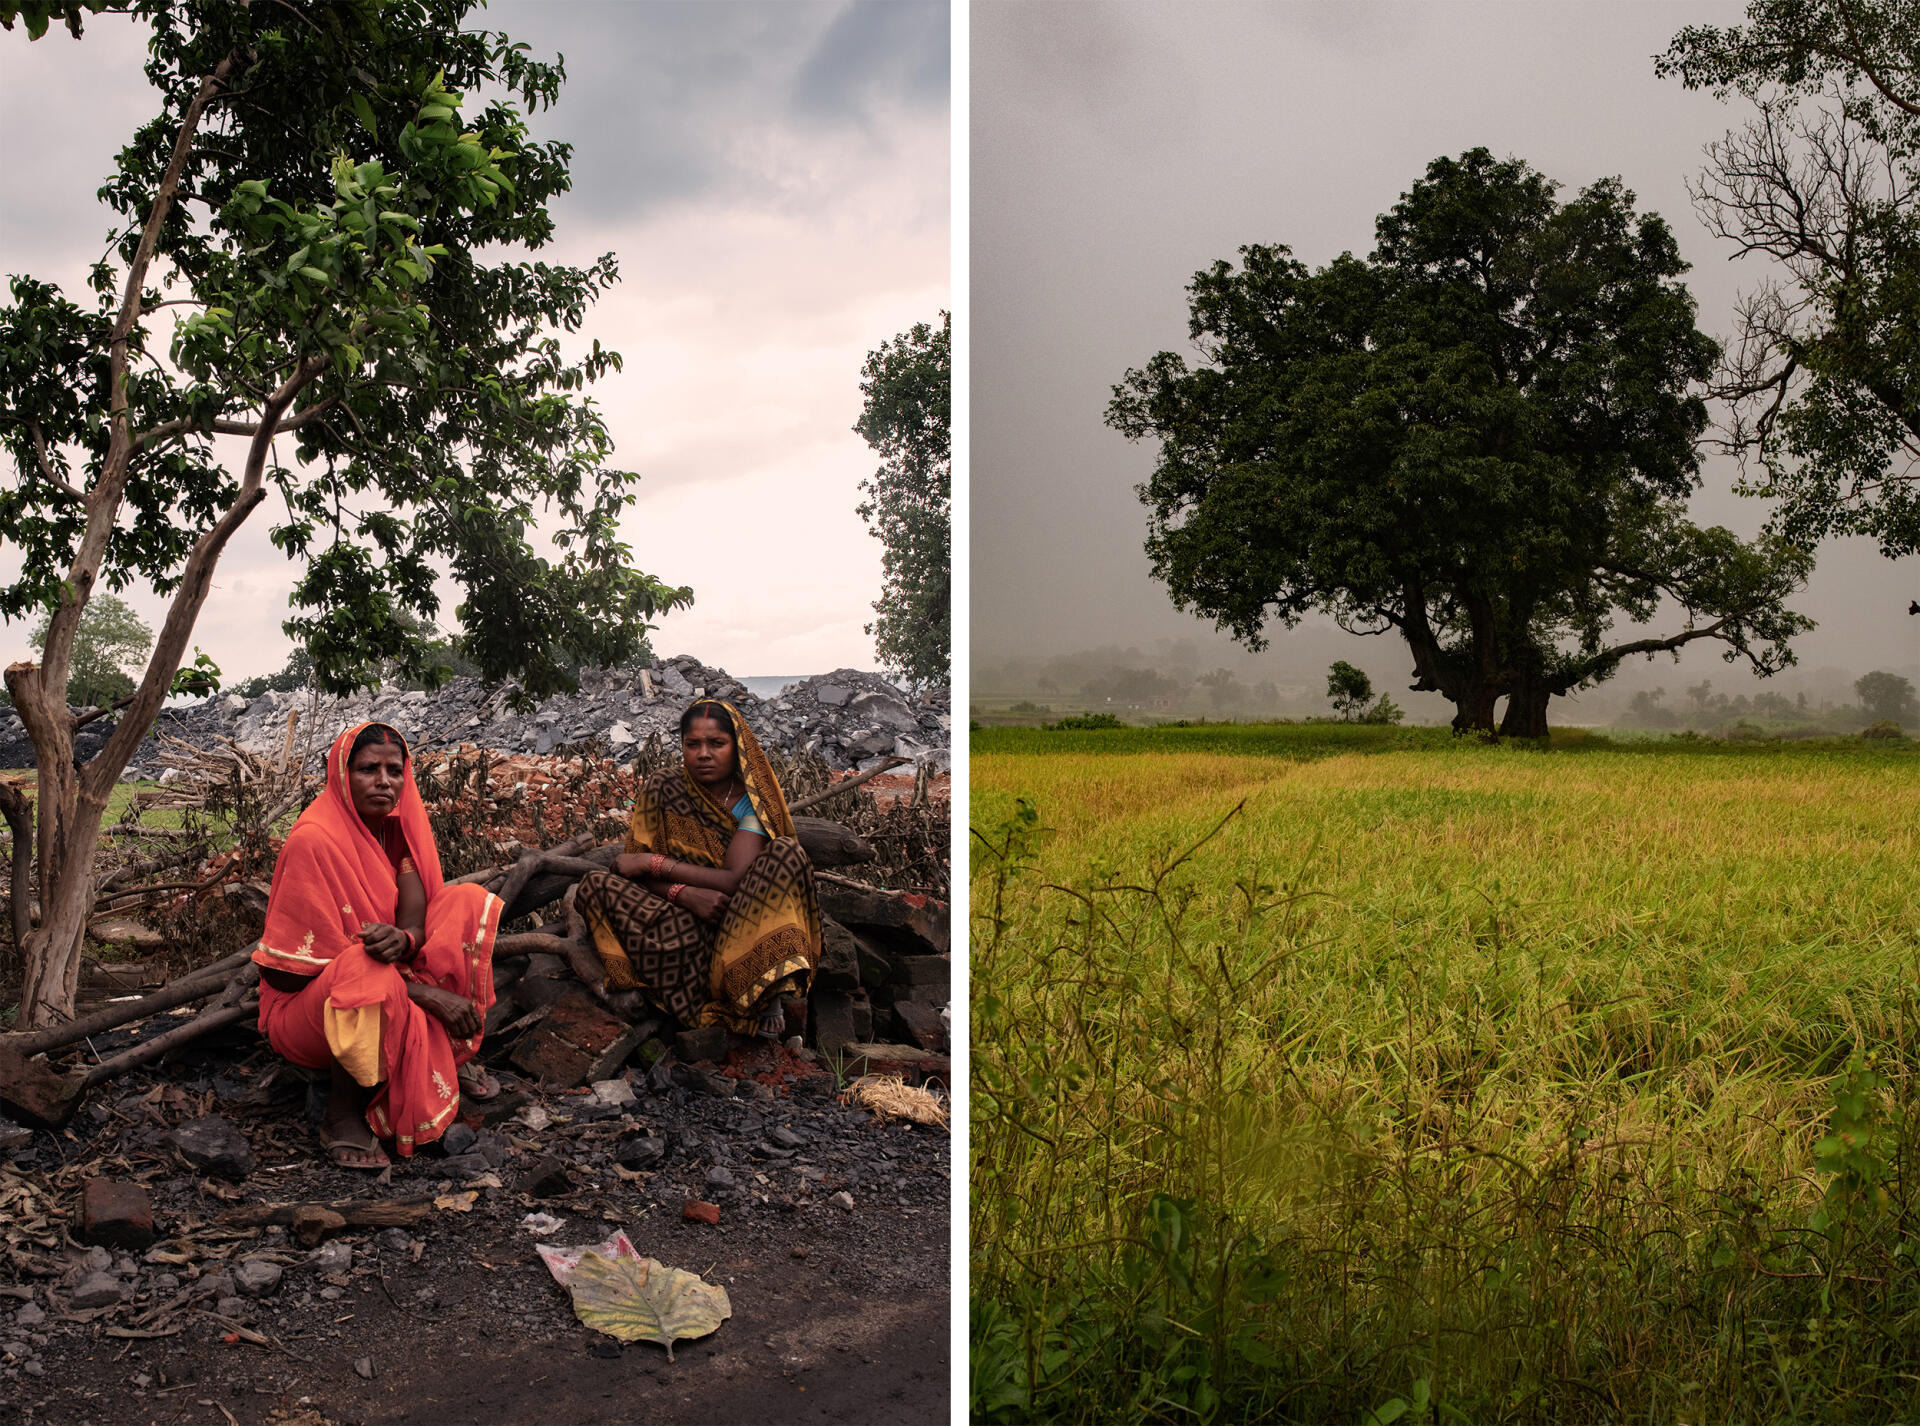 Mohri Devi, 58, and Vidha Devi, 32, lived here in Alagdiha, where the mine is operated by NTPC. They were moved to a nearby village this year. On the right, a field cultivated by the inhabitants in Gandulpara (India), October 17, 2021. The Adani group is now trying to acquire land from the villagers.